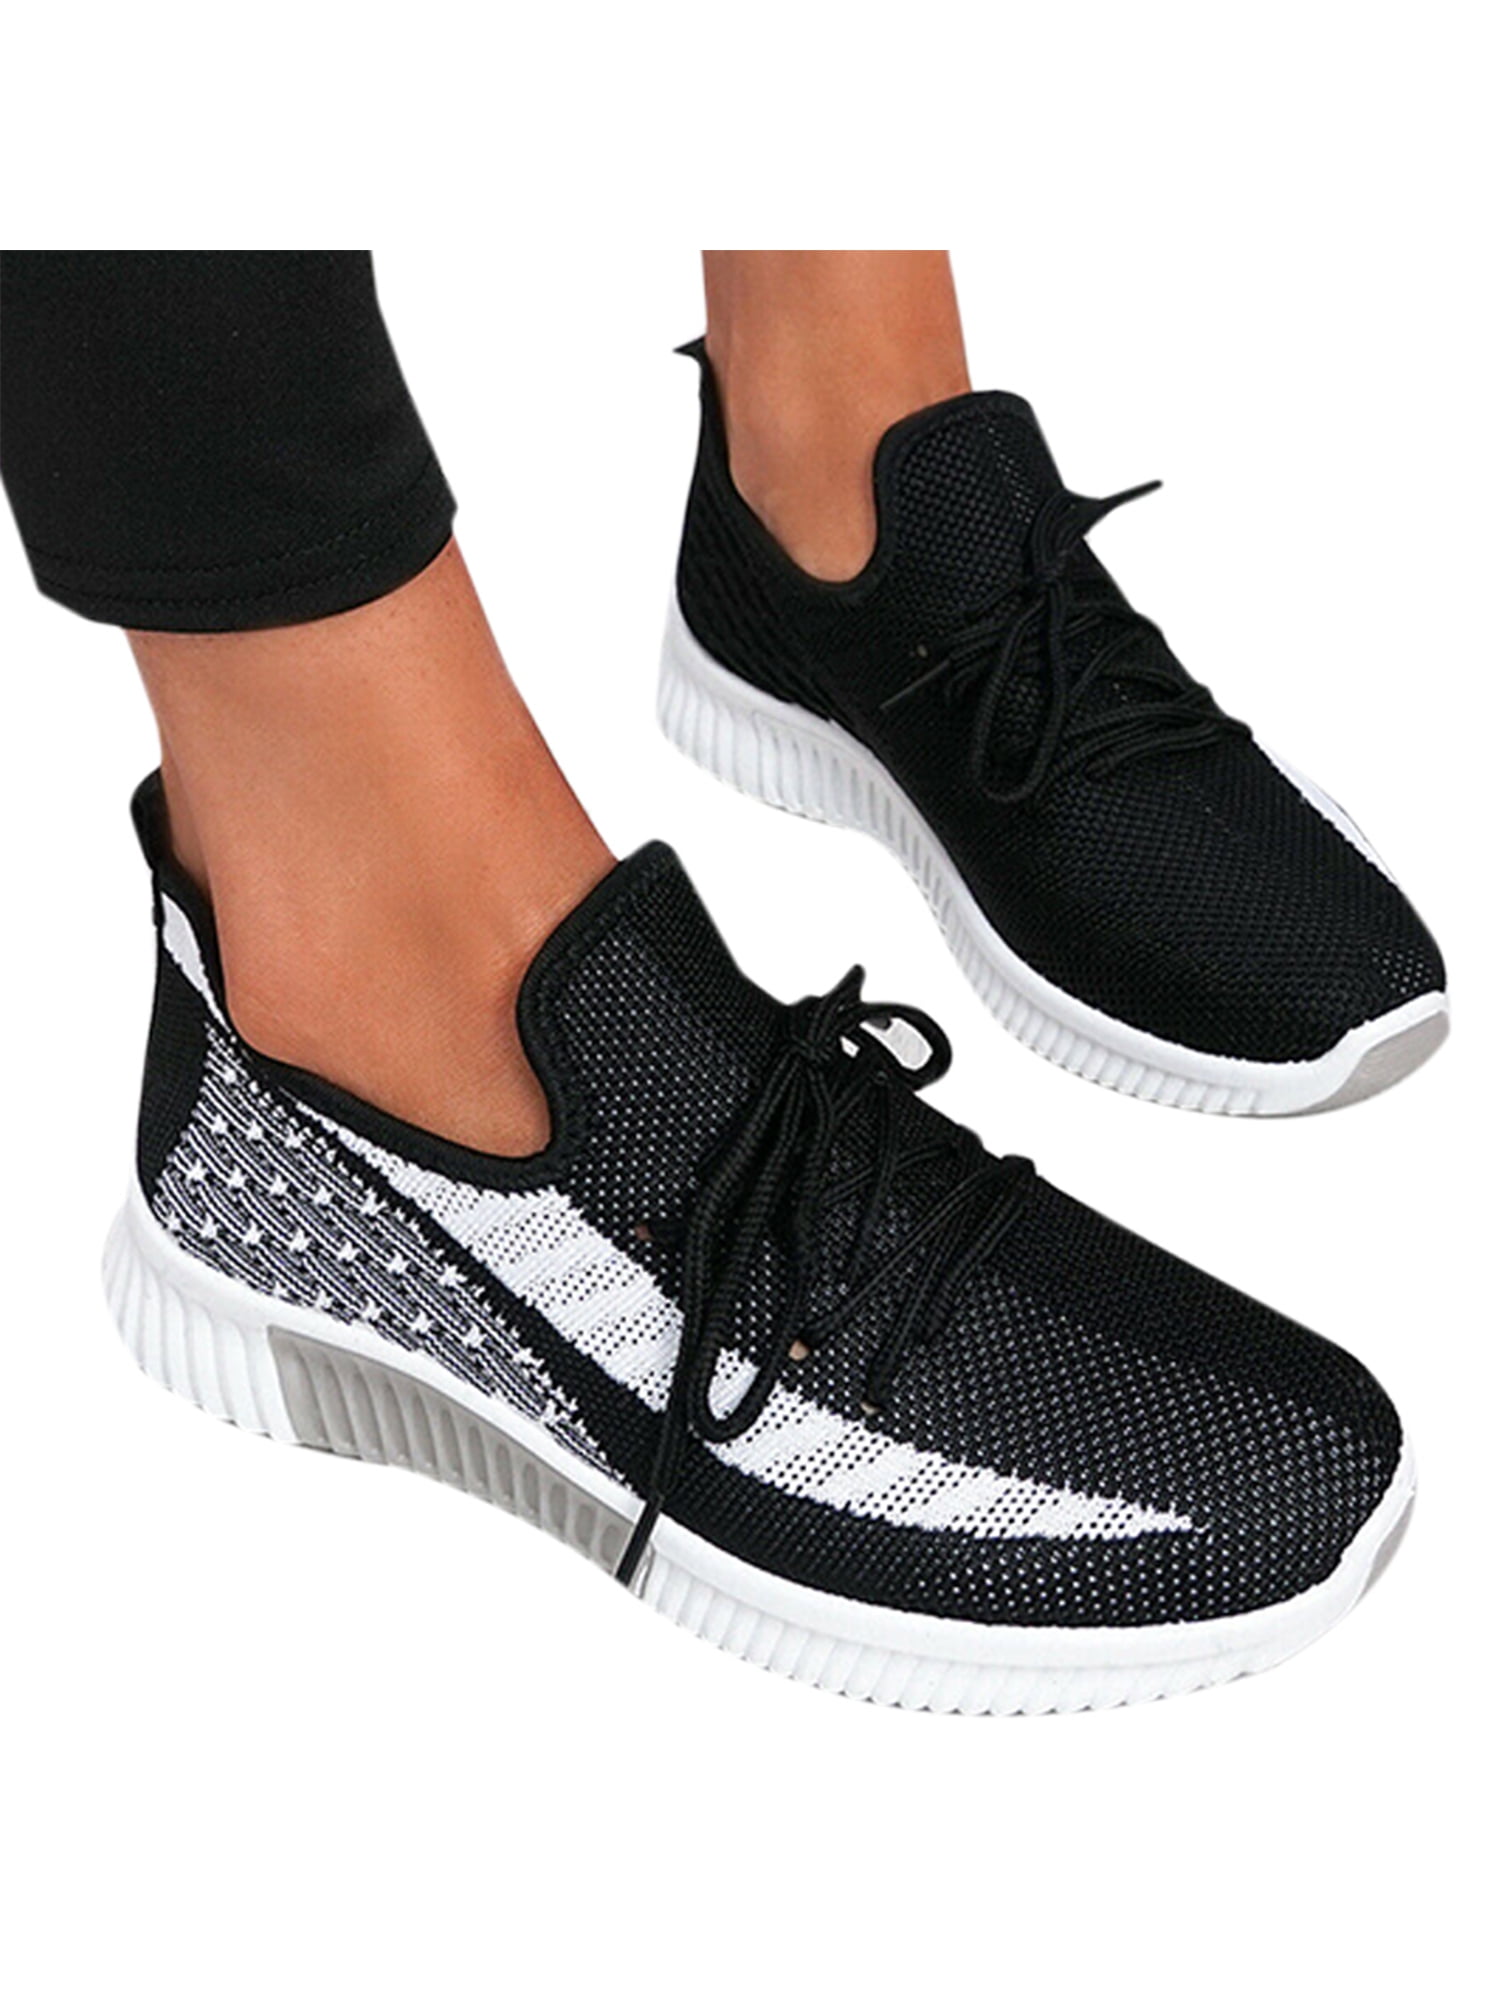 MENS WOMENS SUPER PUMPS TRAINERS LACE UP CASUAL WHITE SHOES SPORT GYM SIZE 